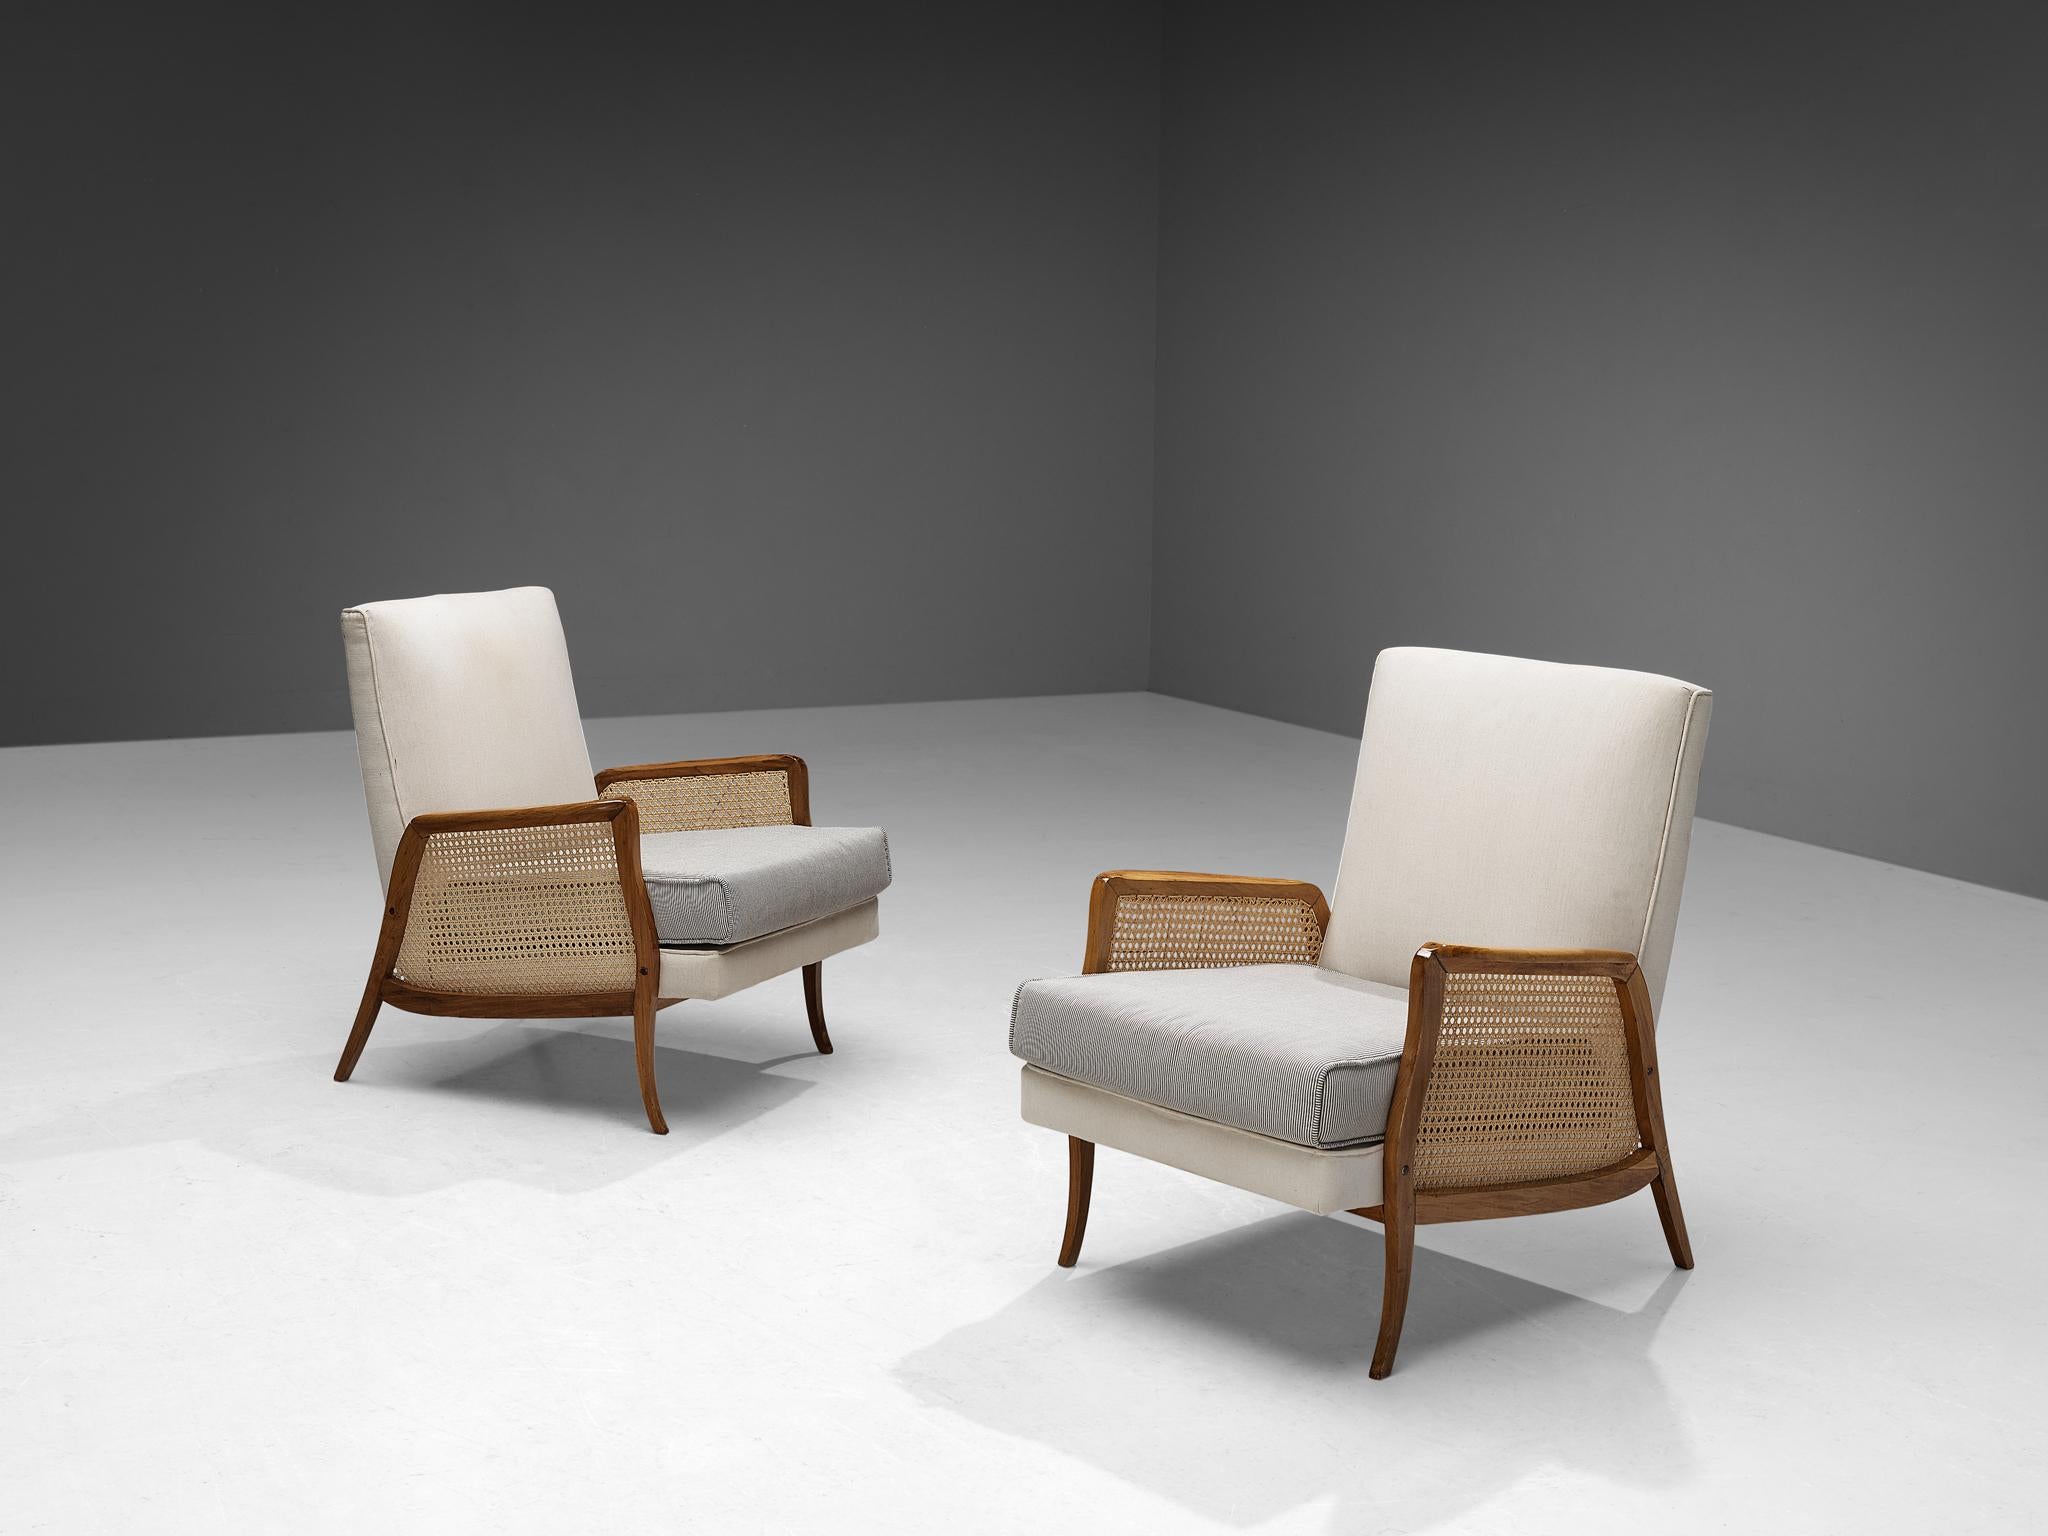 Pair of lounge chairs, walnut, fabric, cane, Brazil, 1950s.

The style of these Brazilian armchairs is simple and understated, where clear, fluent lines are allowed to emerge in the design. The wooden frame in walnut embodies striking curvaceous